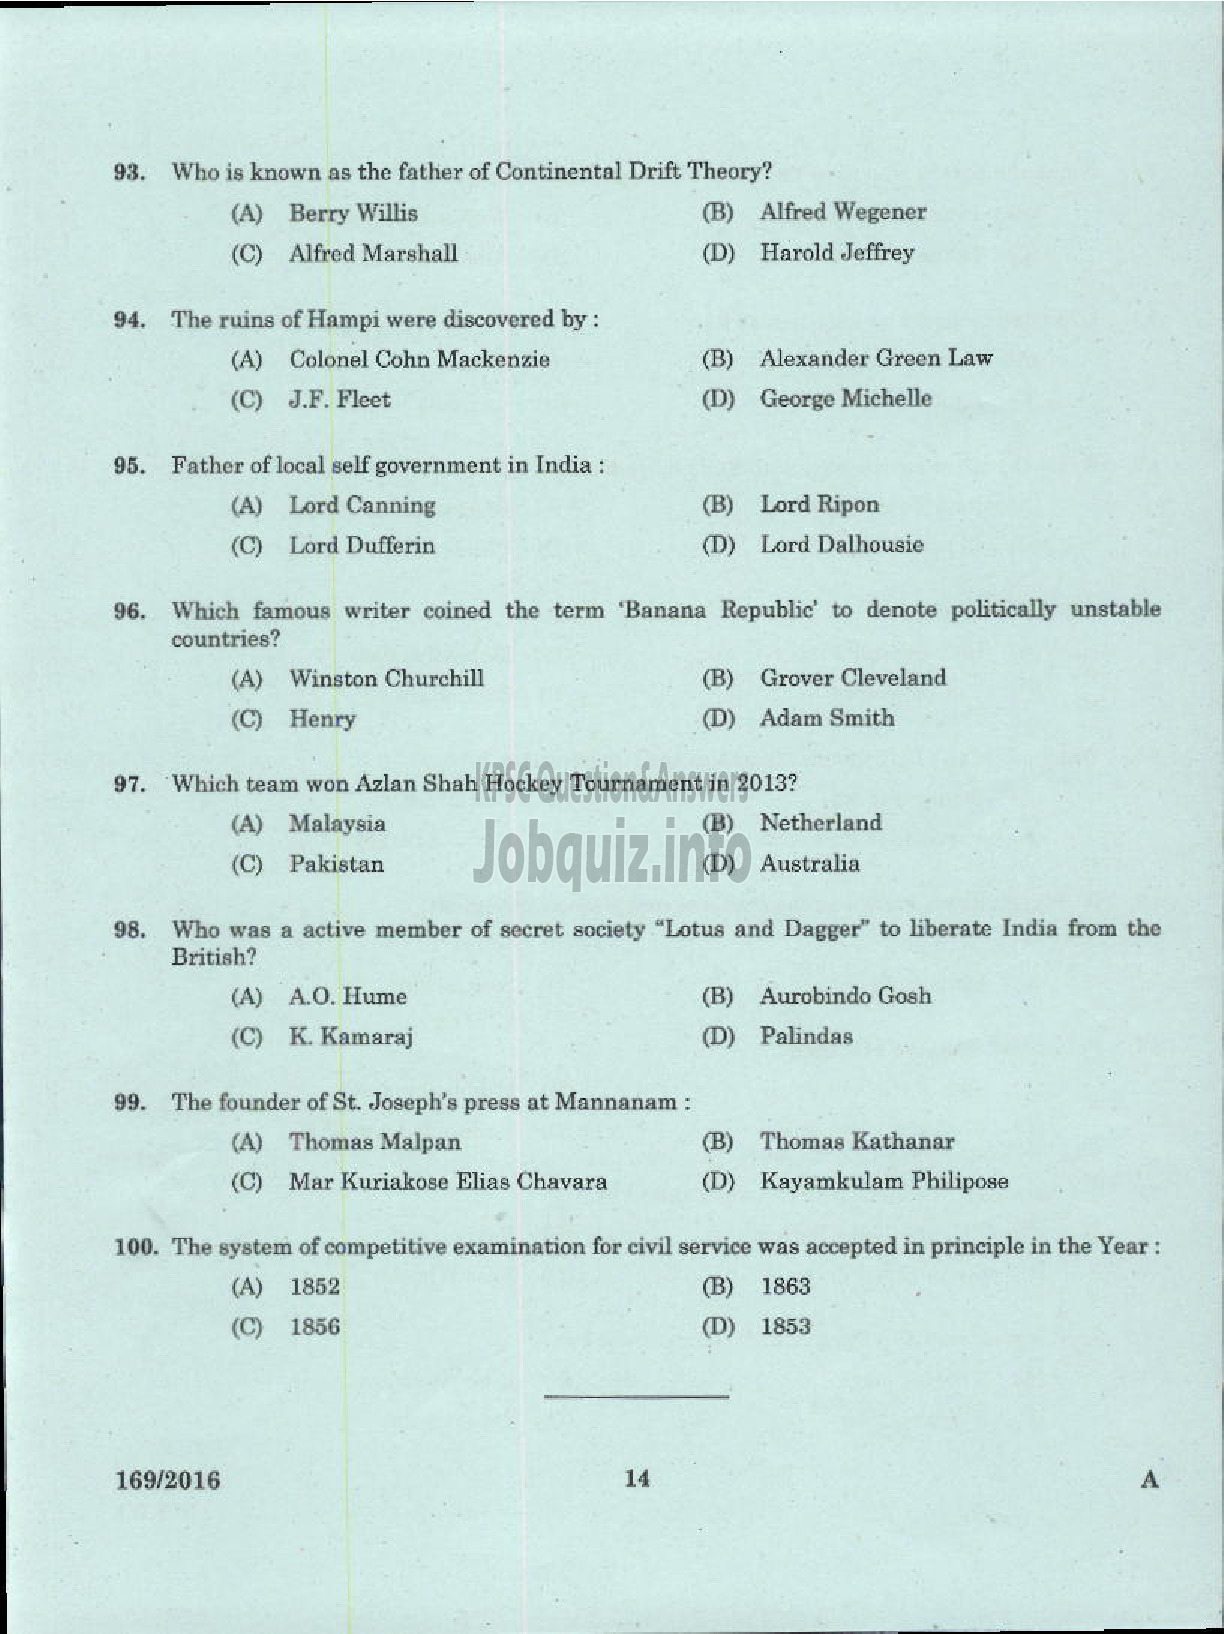 Kerala PSC Question Paper - TRADESMAN REFRIGERATION AND AIR CONDITIONING TECHNICAL EDUCATION-12